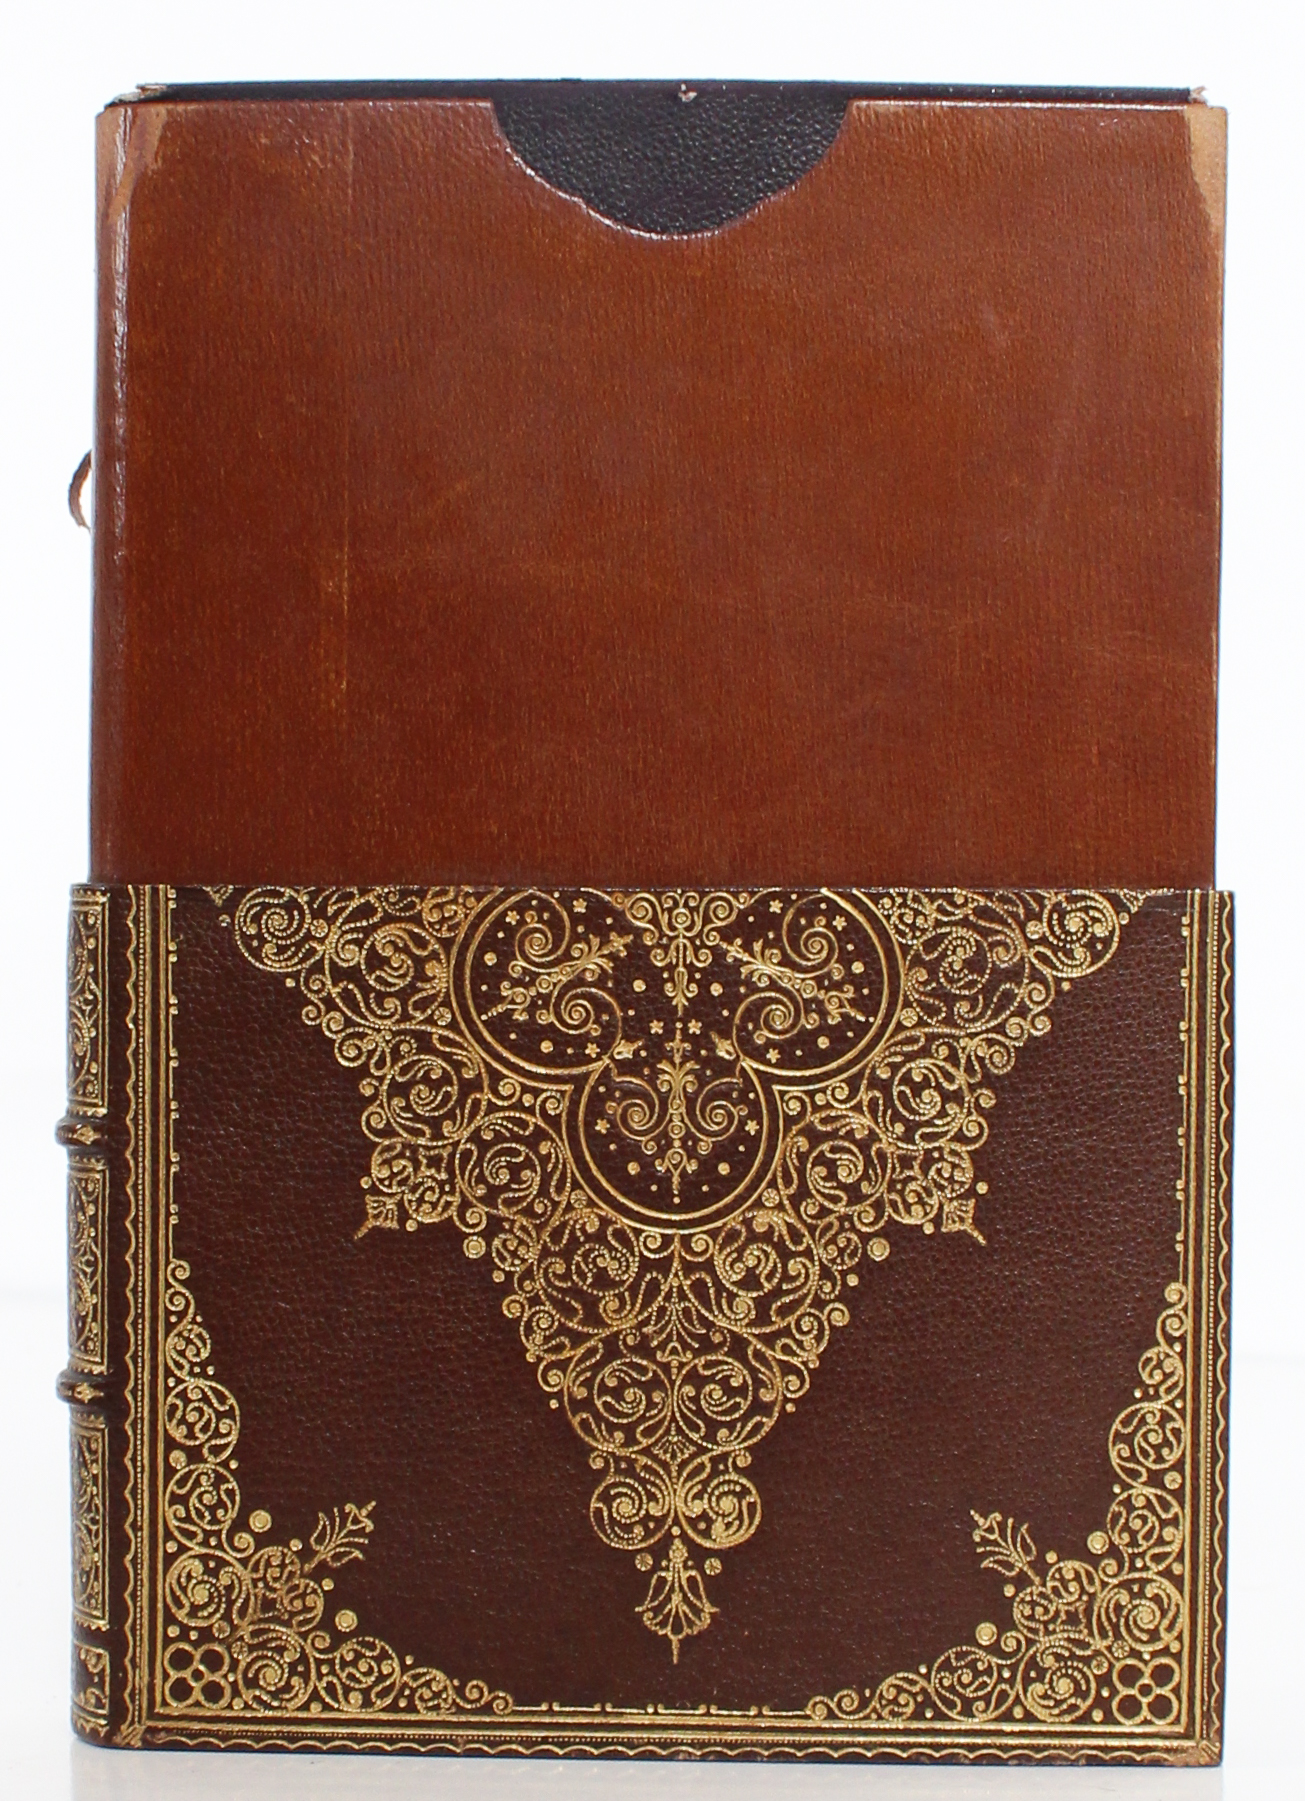 Evangeline, Longfellow, First Ed 1847 with Letter - Image 5 of 7